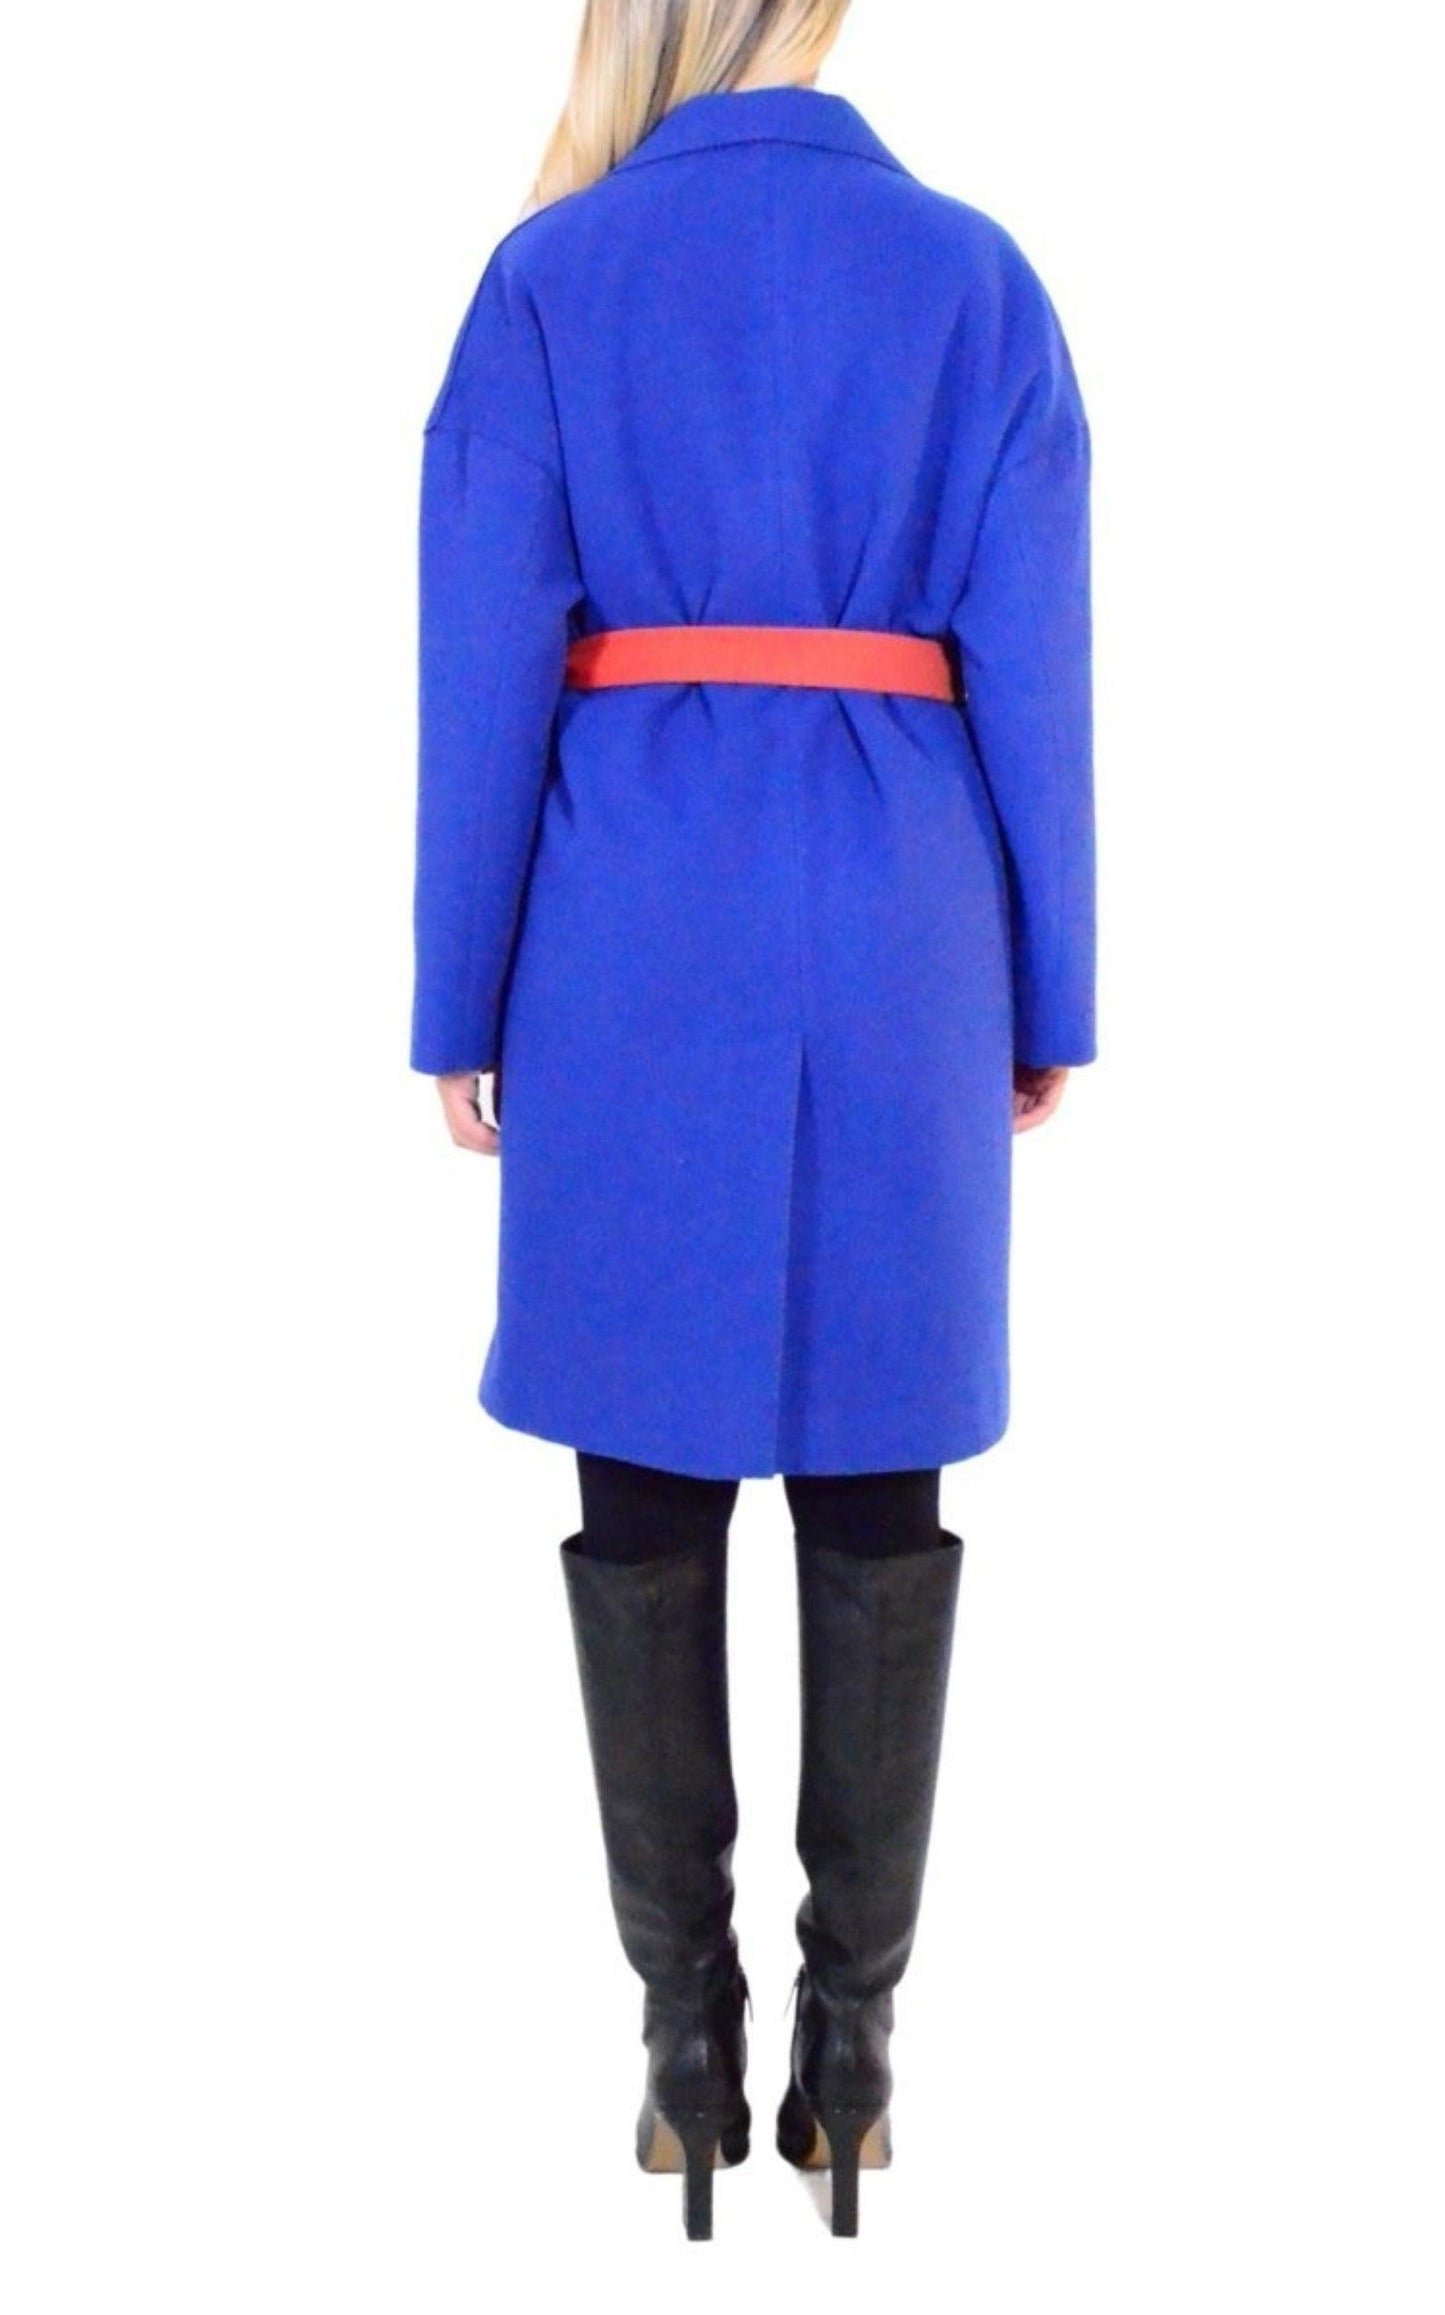  Cult ModaBlue Belted Wrap Trench Coat - Runway Catalog